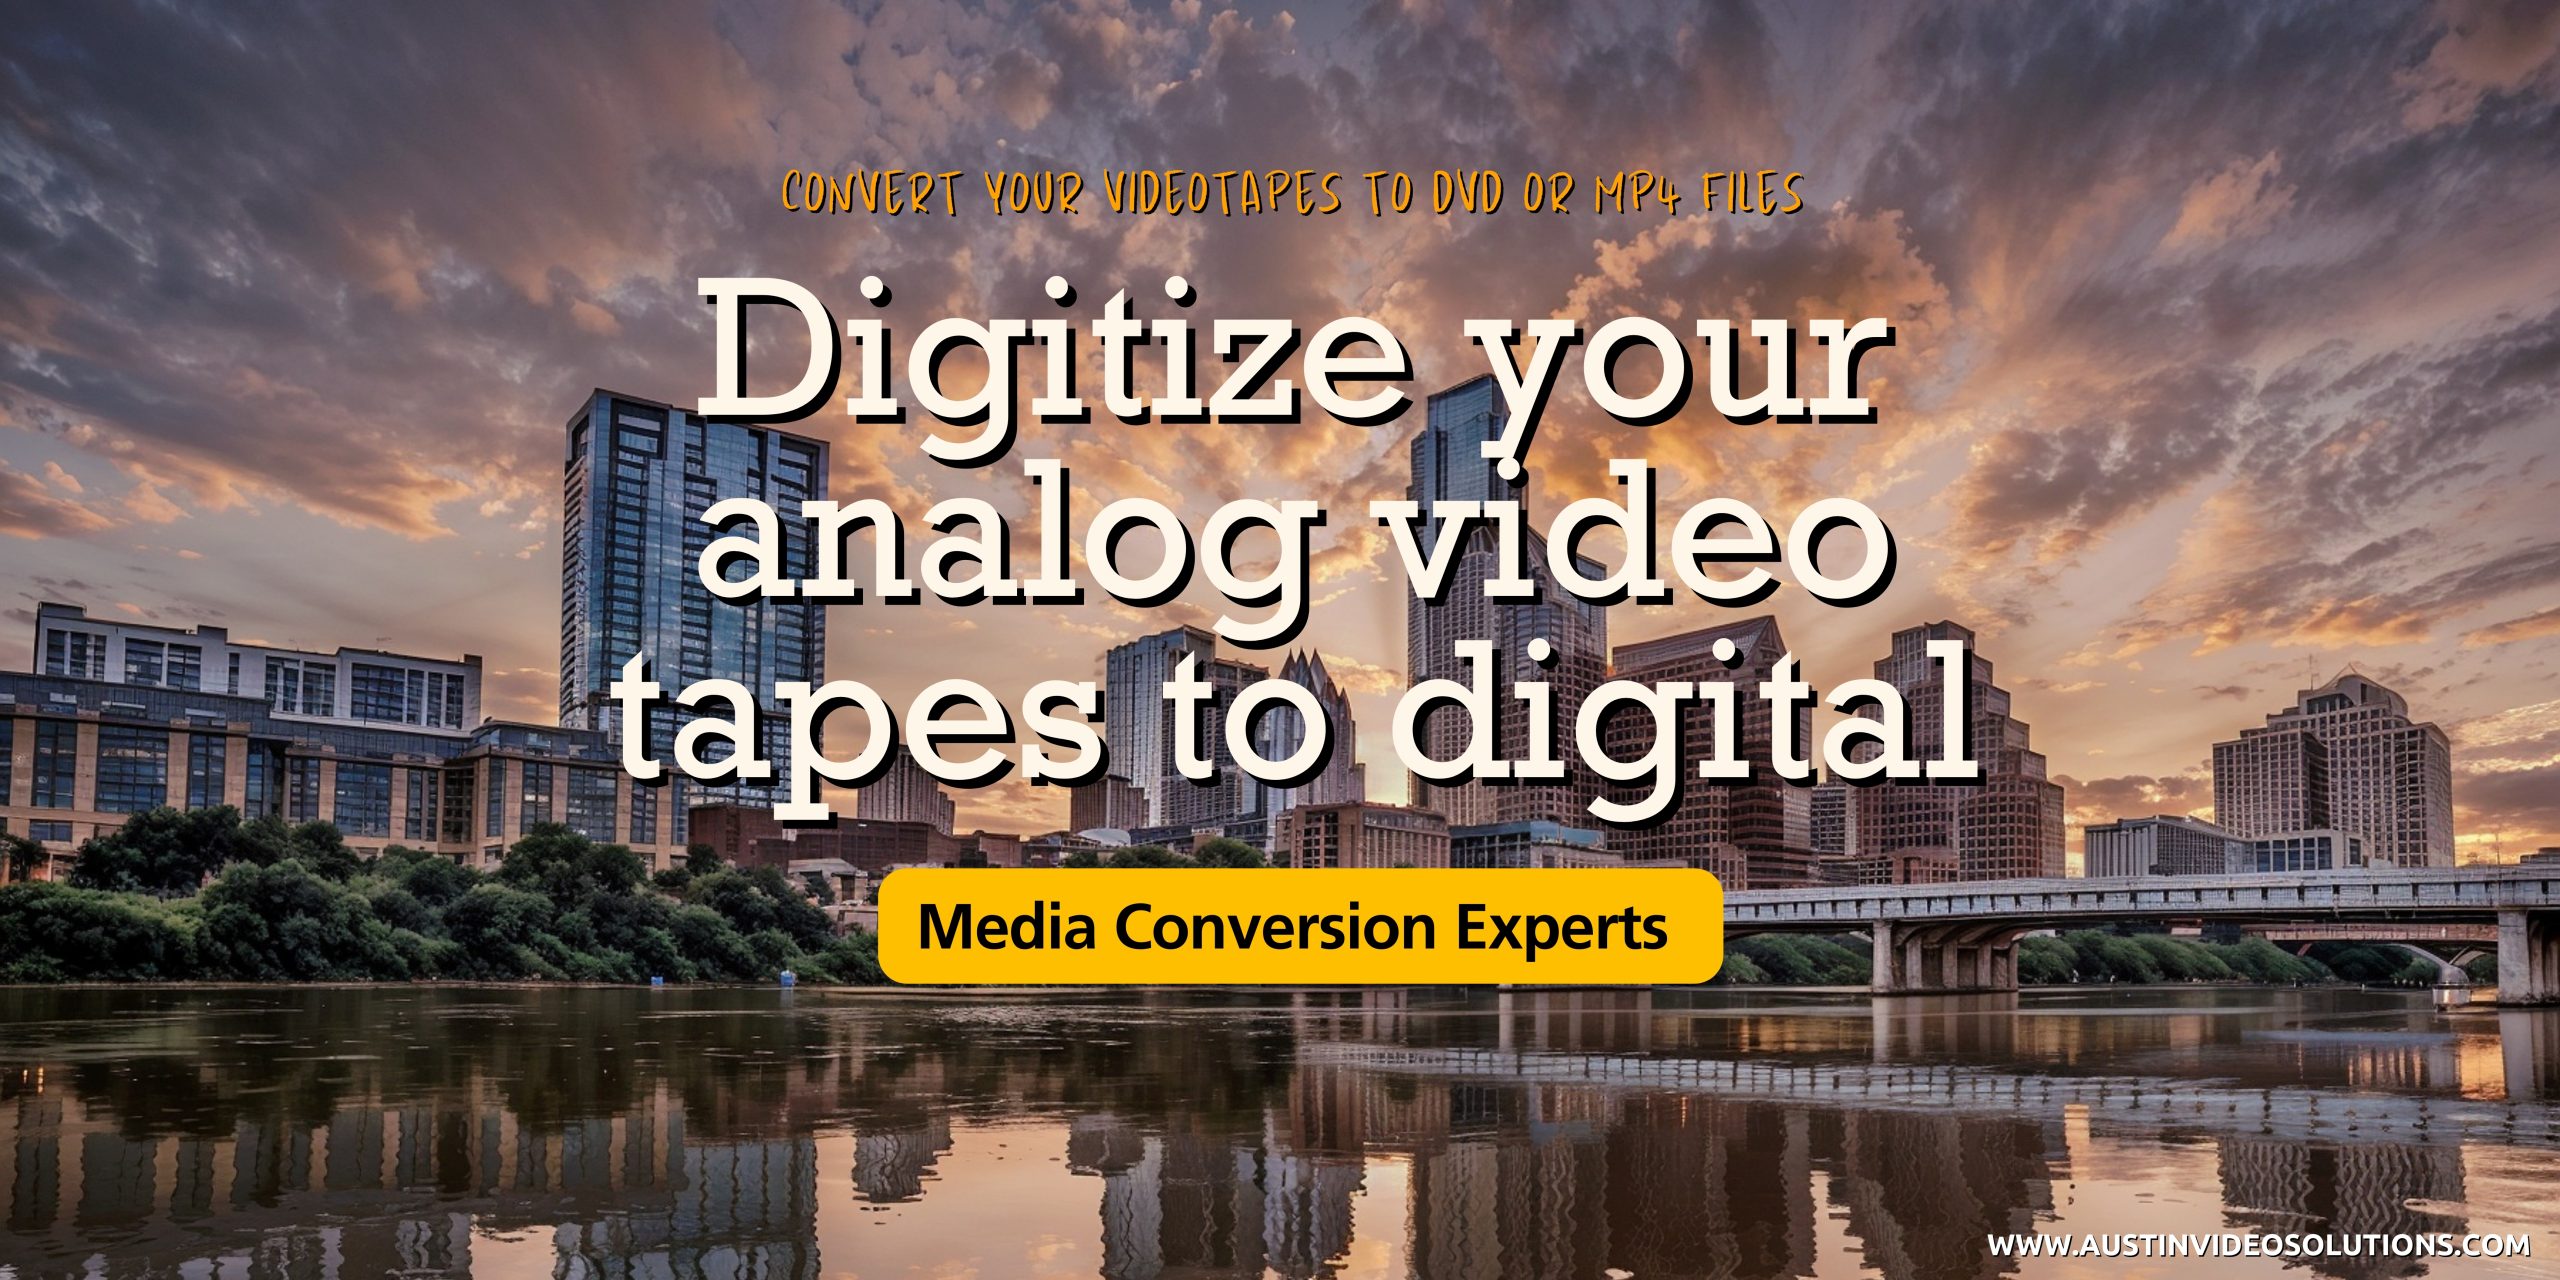 Austin Video Solutions Austin Video Solutions offers an effortless path to digitize your analog media. We convert everything from home movies to photos and films. Located in Austin, providing hands-on, local expertise for all your digitization needs.